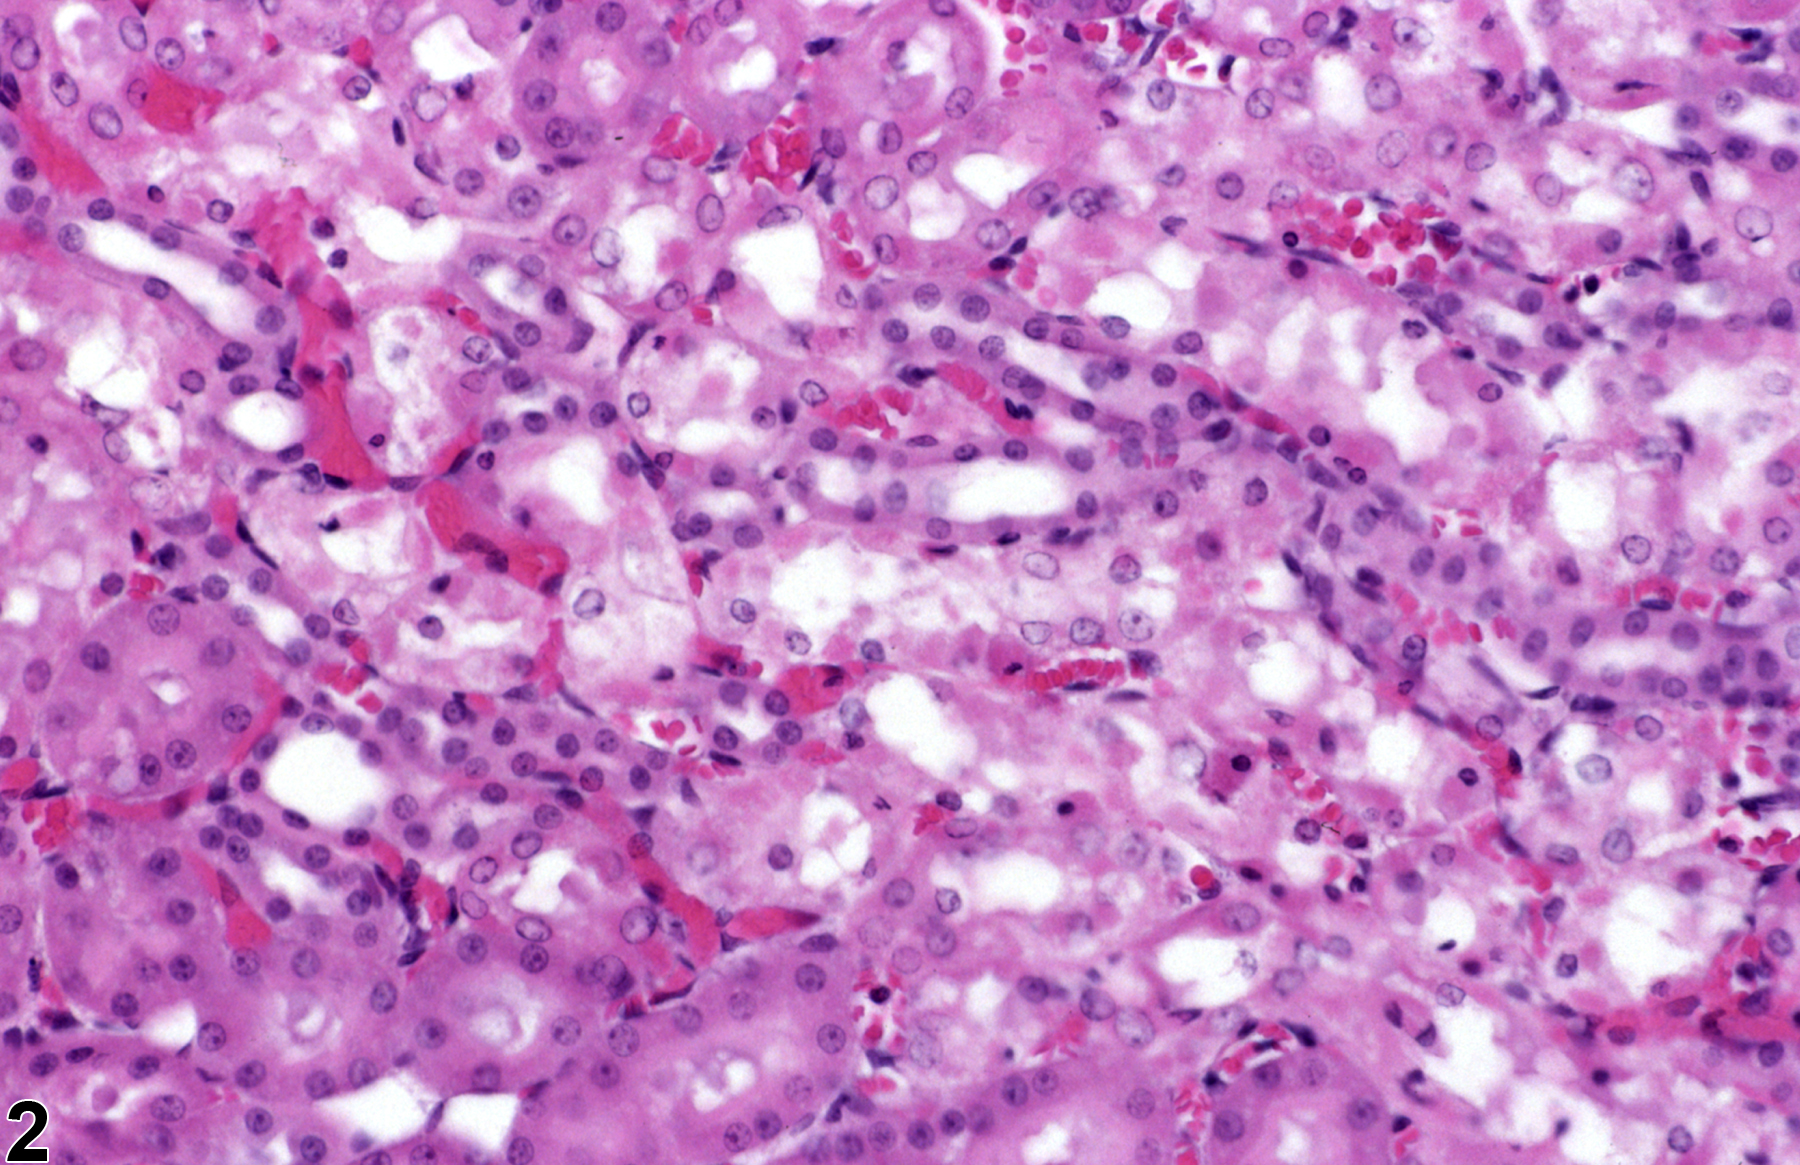 Image of renal tubule degeneration in the kidney from a female F344/N rat in a subchronic study